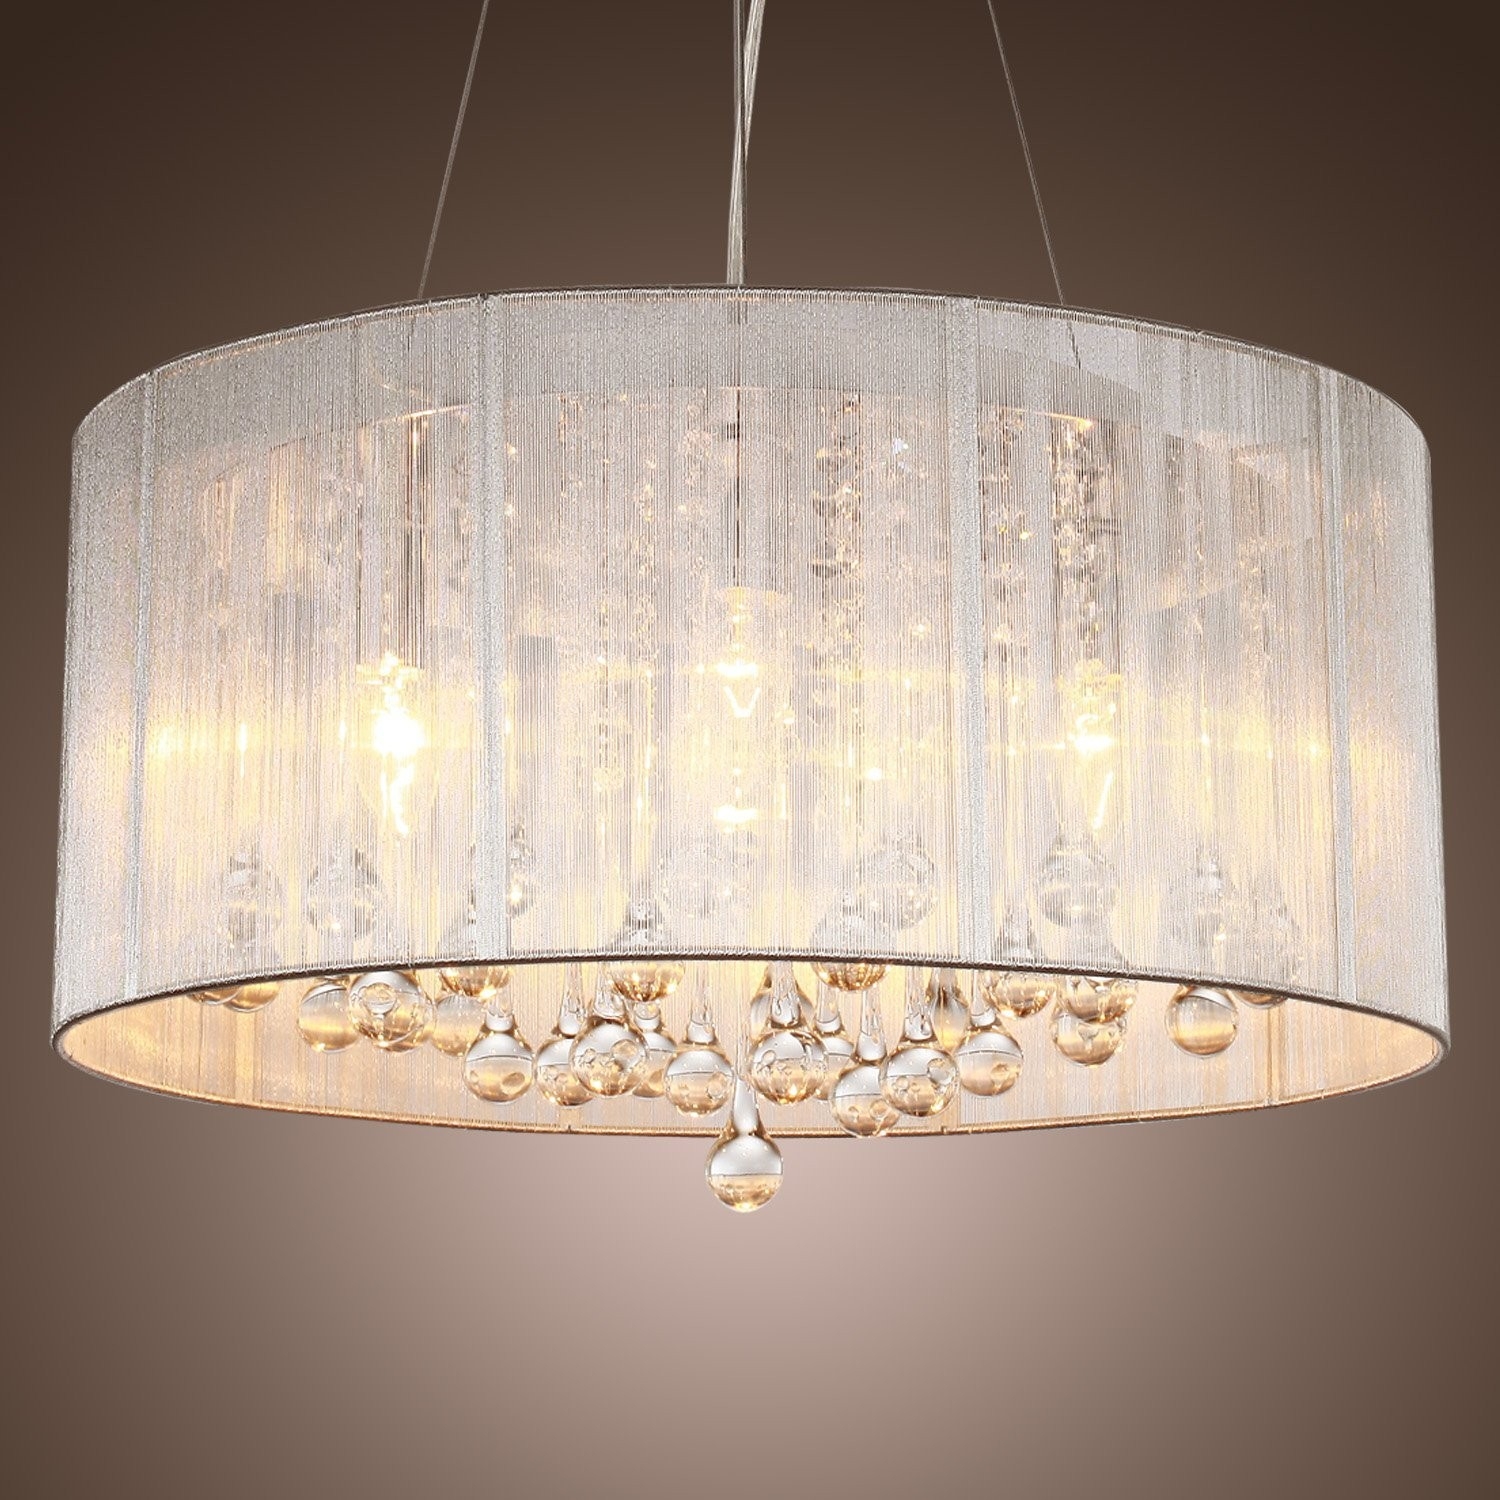 Permalink to Drum Style Ceiling Light Fixtures